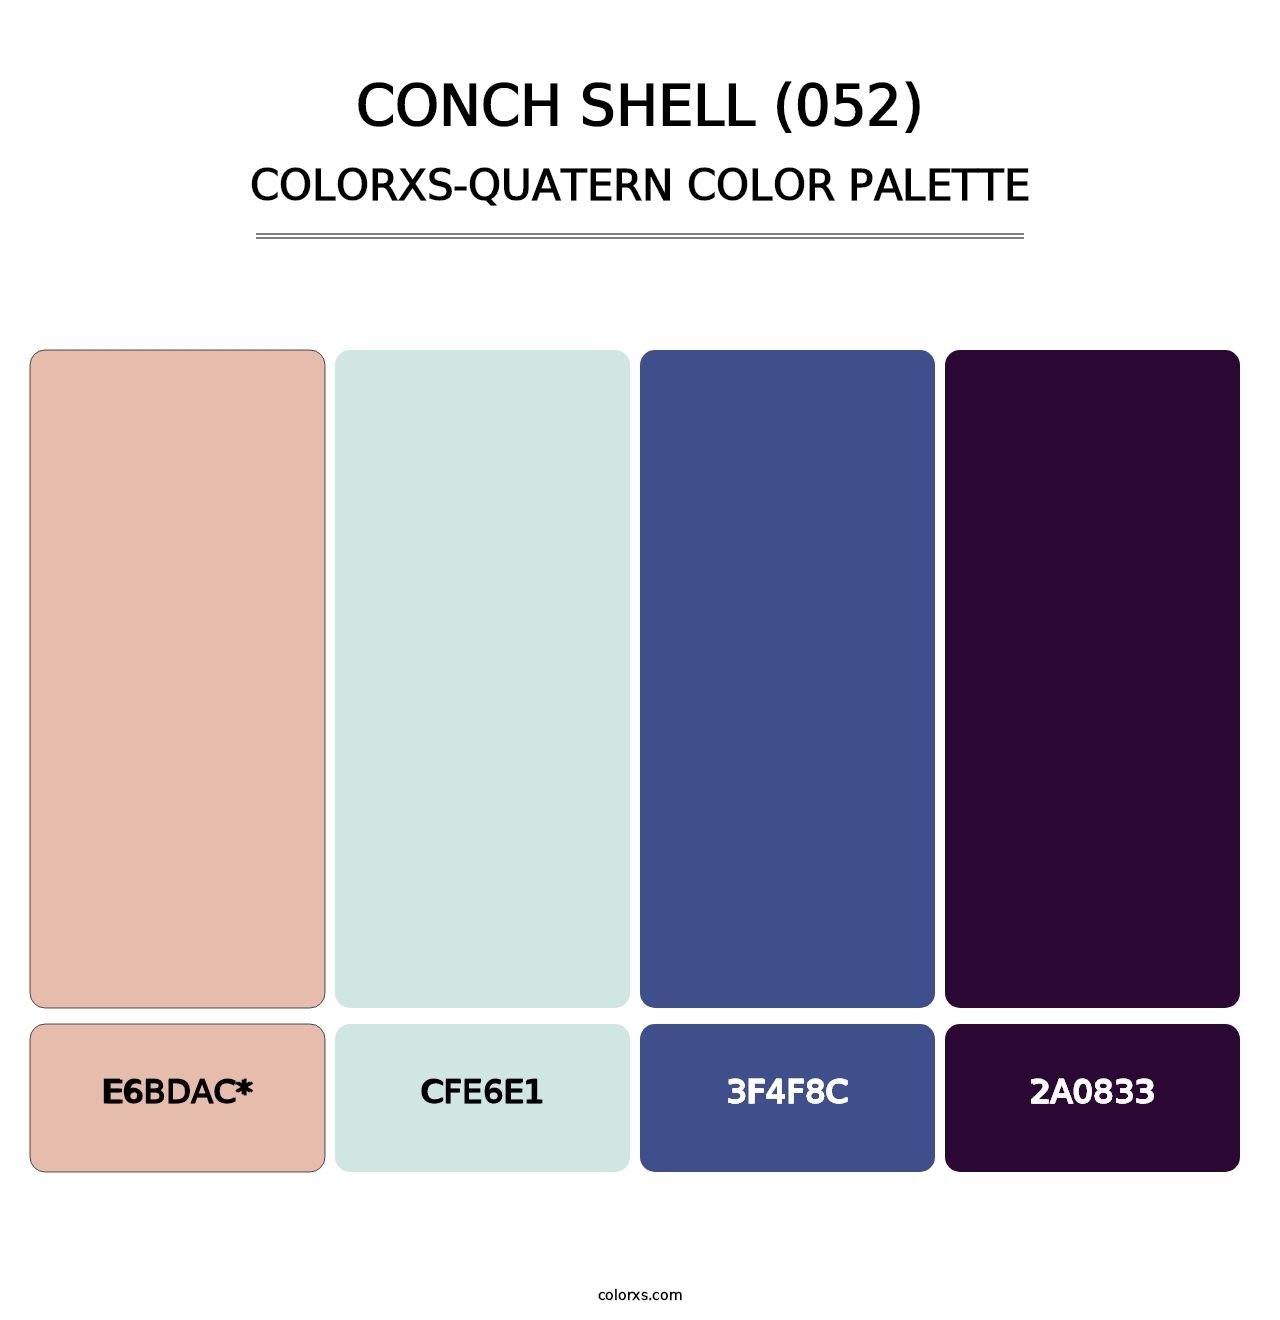 Conch Shell (052) - Colorxs Quatern Palette